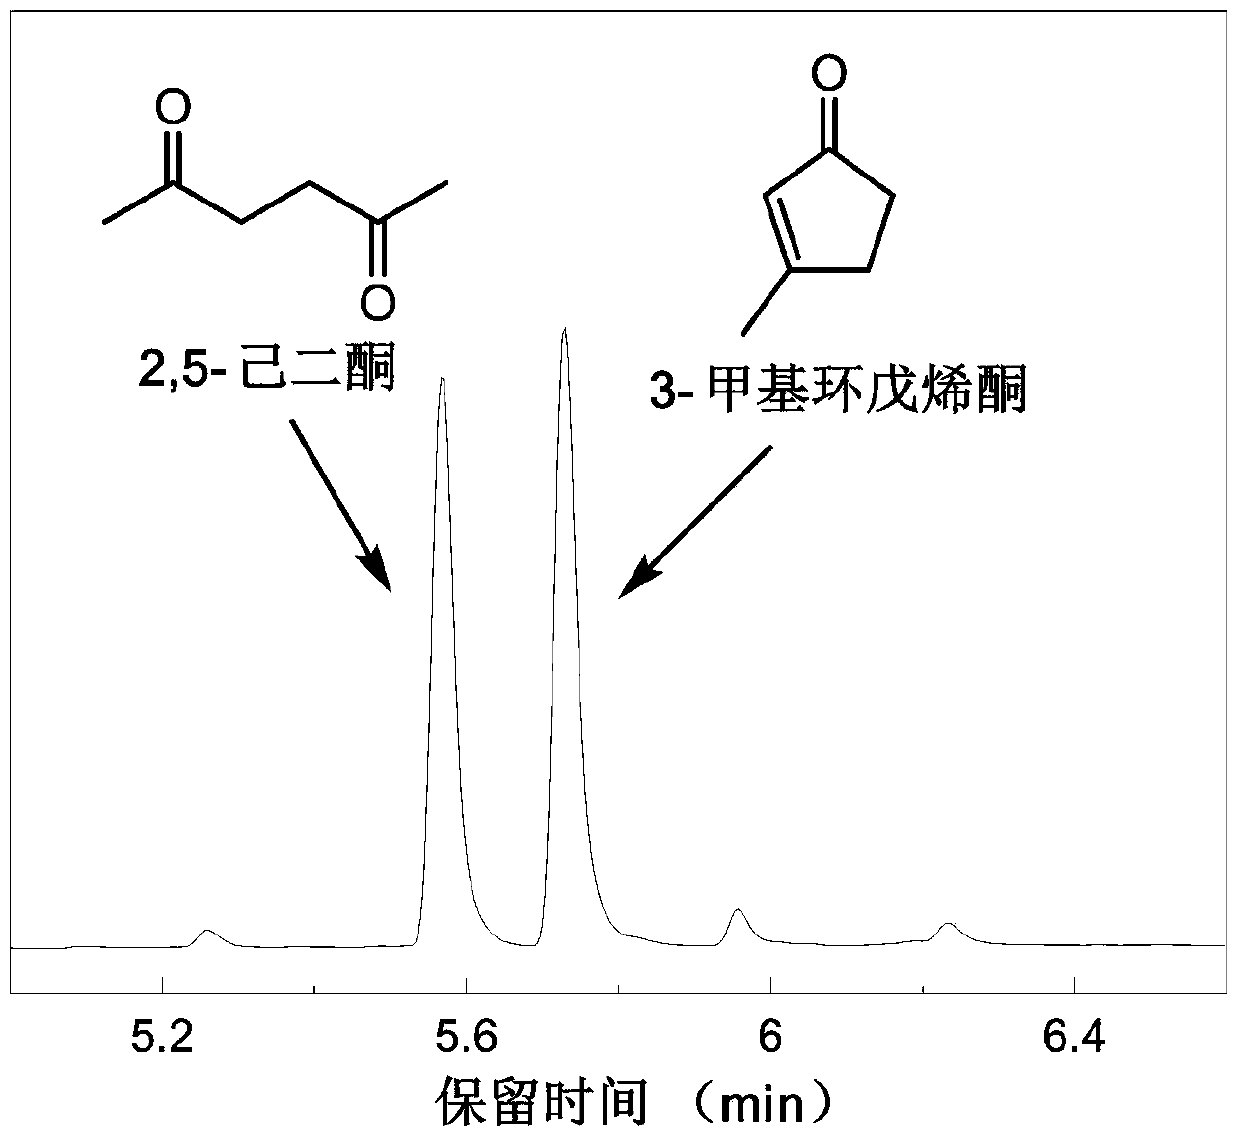 Utilize 5-hydroxymethylfurfural to prepare the method for 2,5-hexanedione and 3-methylcyclopentenone